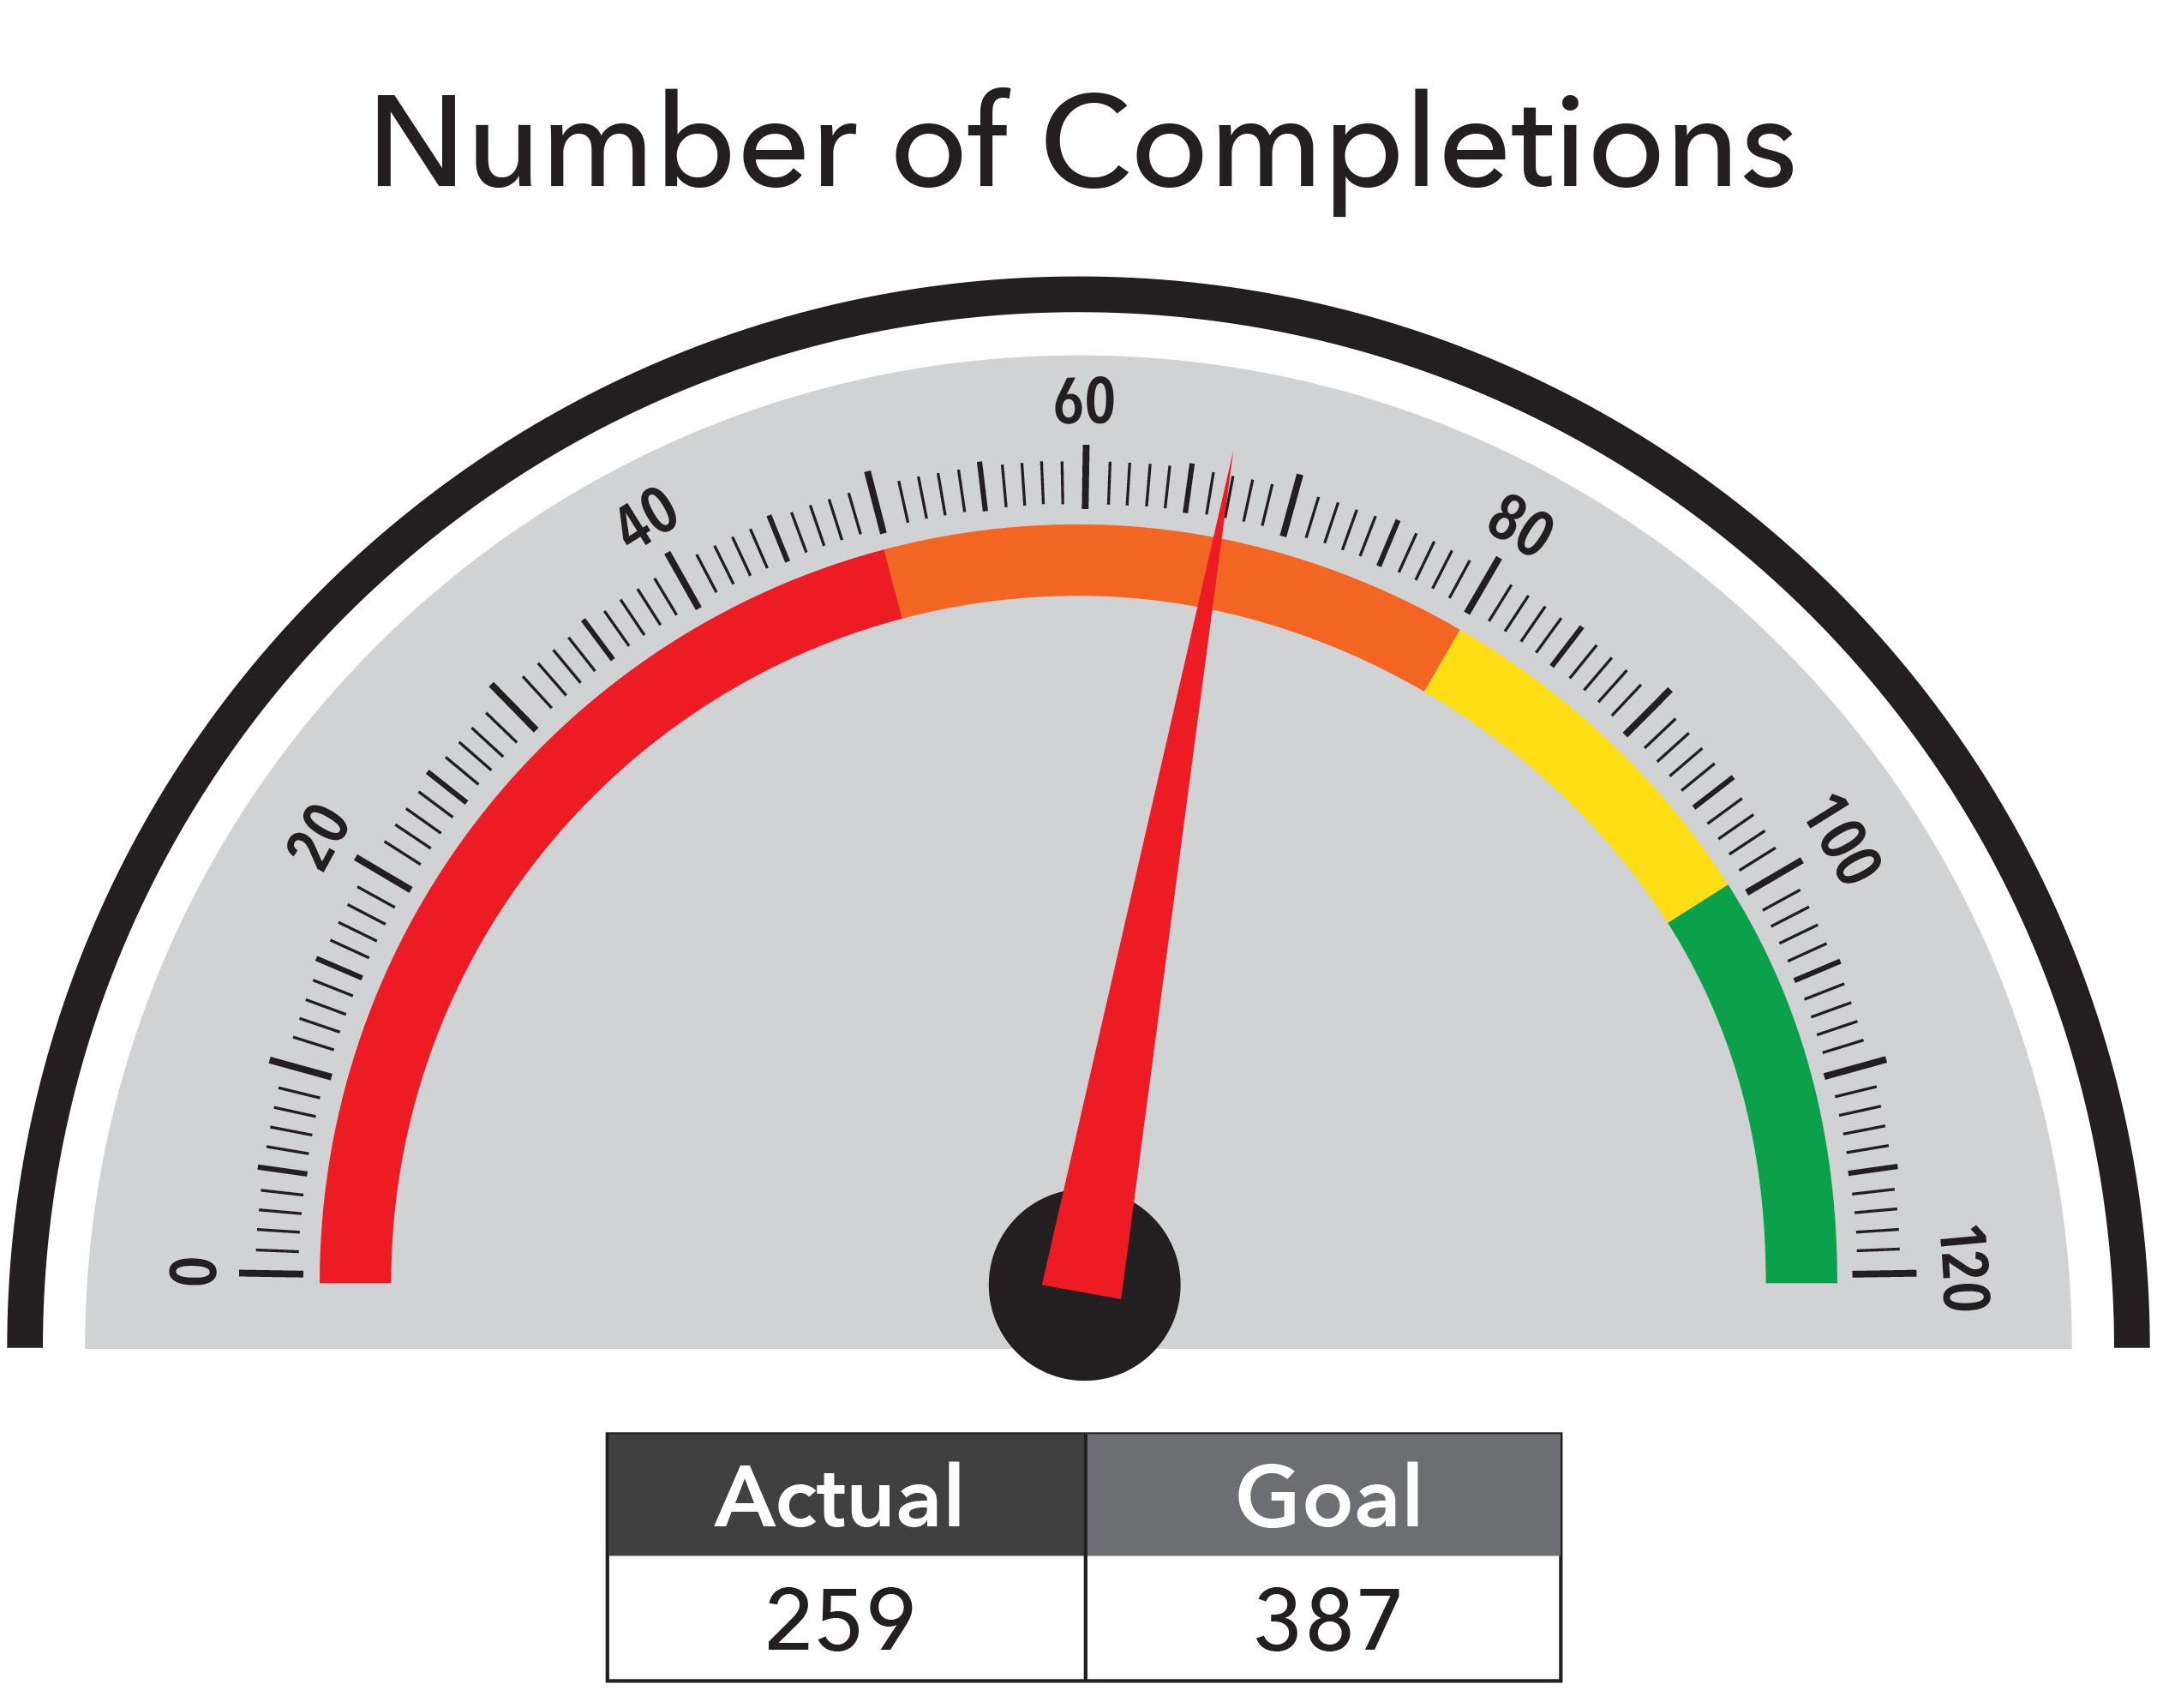 Number of Completions - Actual 368, Goal 387